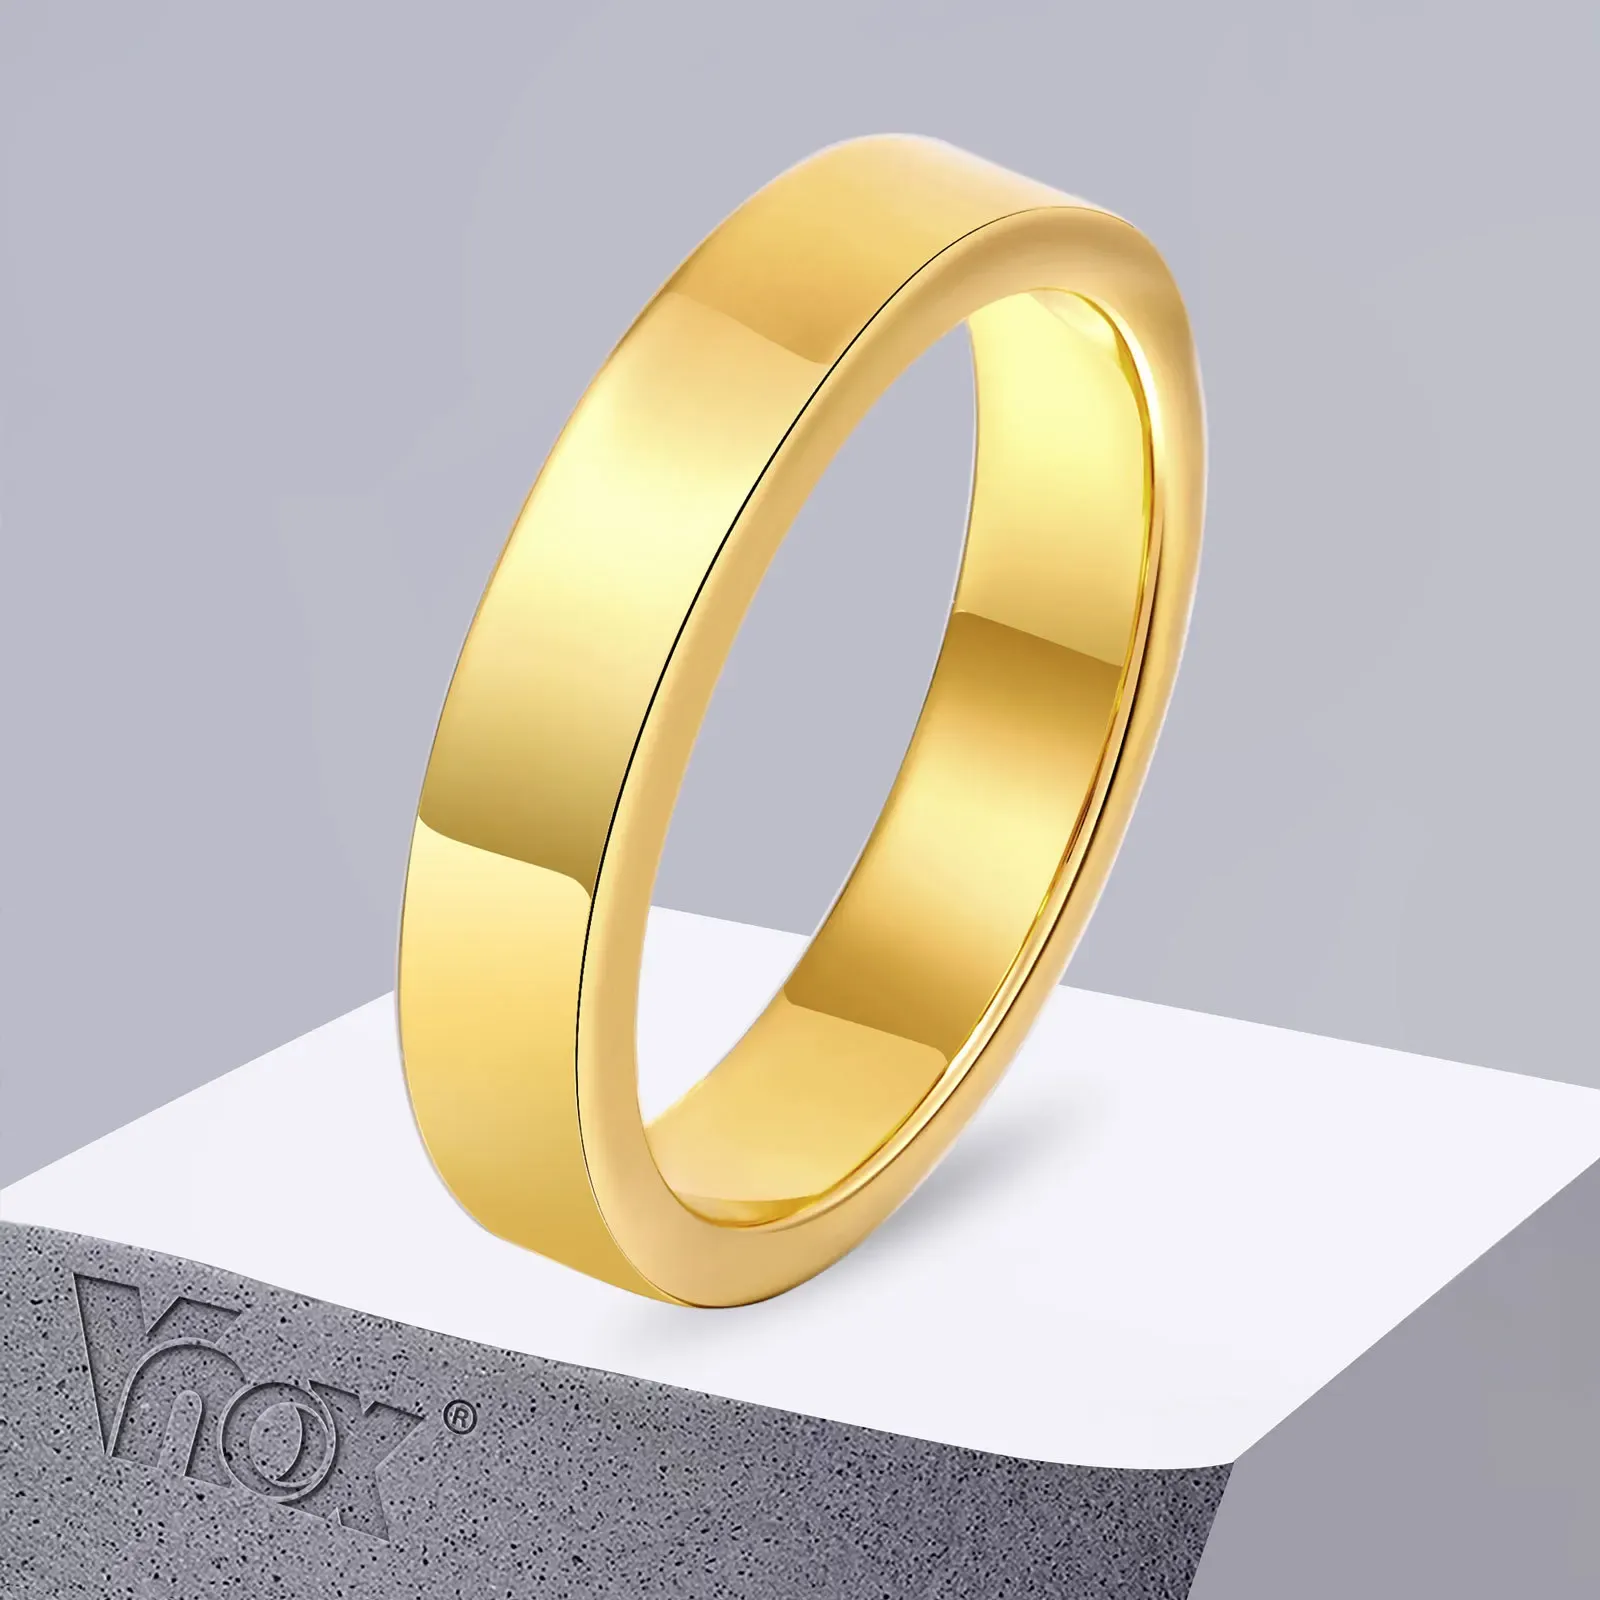 Band VNOX 2/4/6/8mm Tungen Ring for Men Women, Baisc Simple Gold Color Wedding Band, Anti Scratch Minimalist Ring